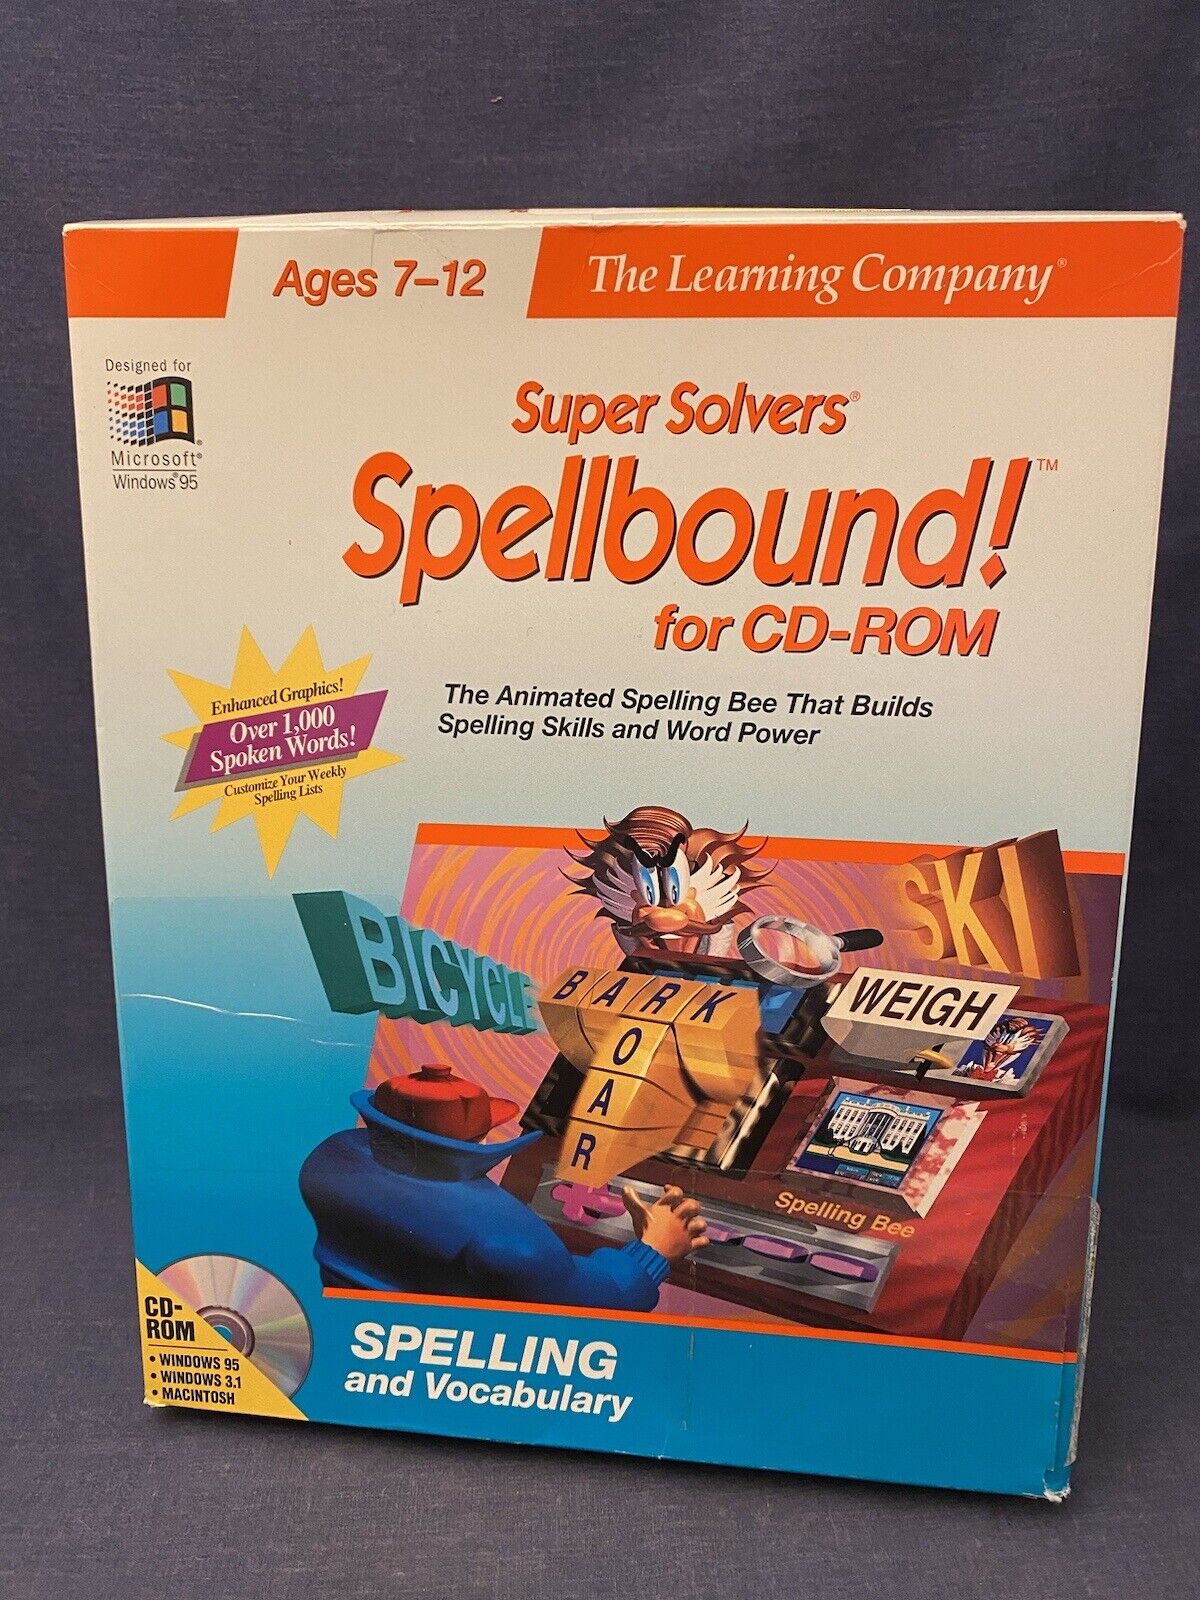 1996 Big Box Computer Game Super Solvers SPELLBOUND CD-ROM Win 95 3.1 Mac Learn